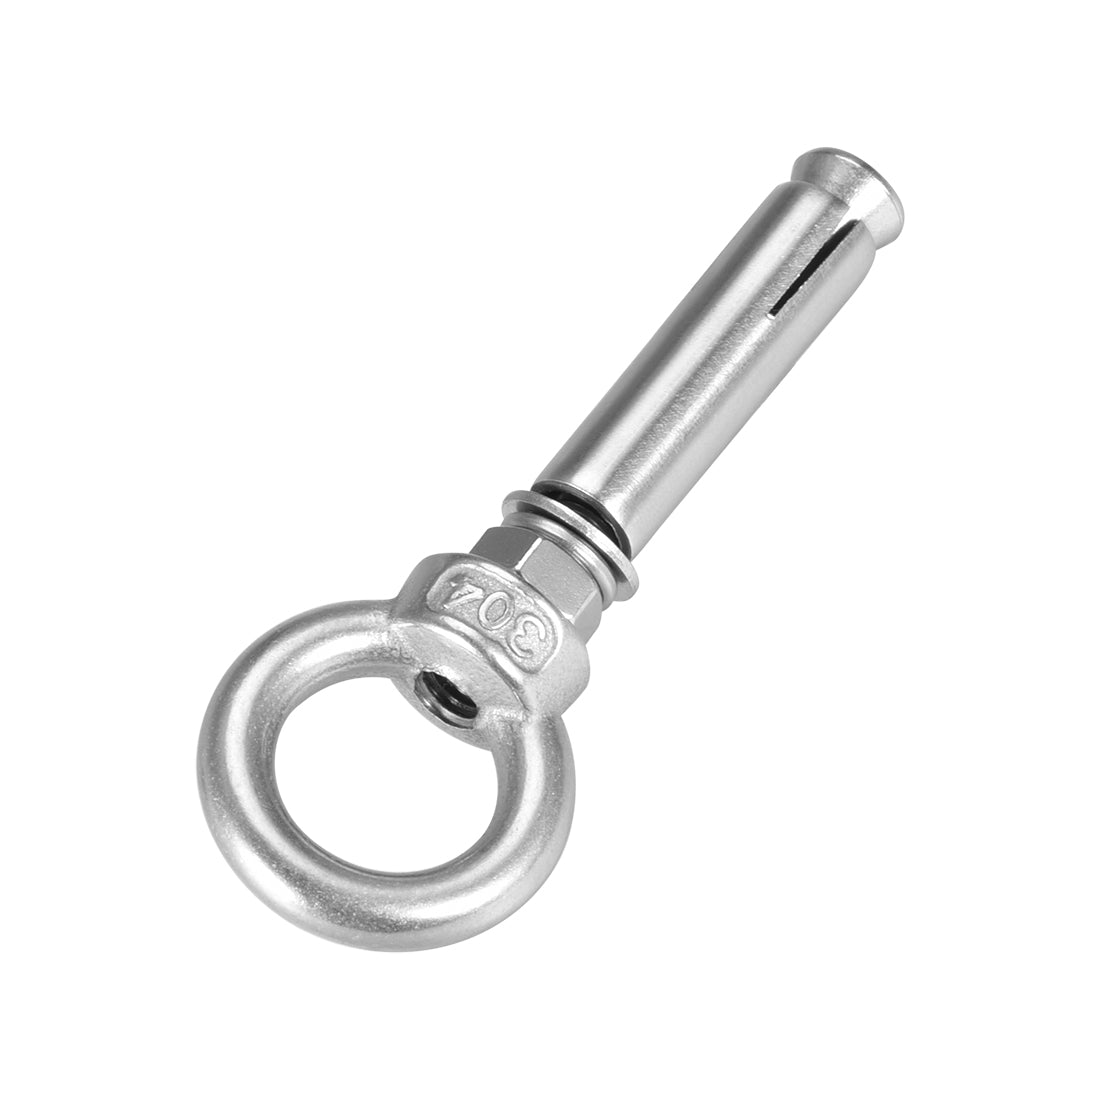 uxcell Uxcell M6 x 50 Expansion Eyebolt Eye Nut Screw with Ring Anchor Raw Bolts 2 Pcs